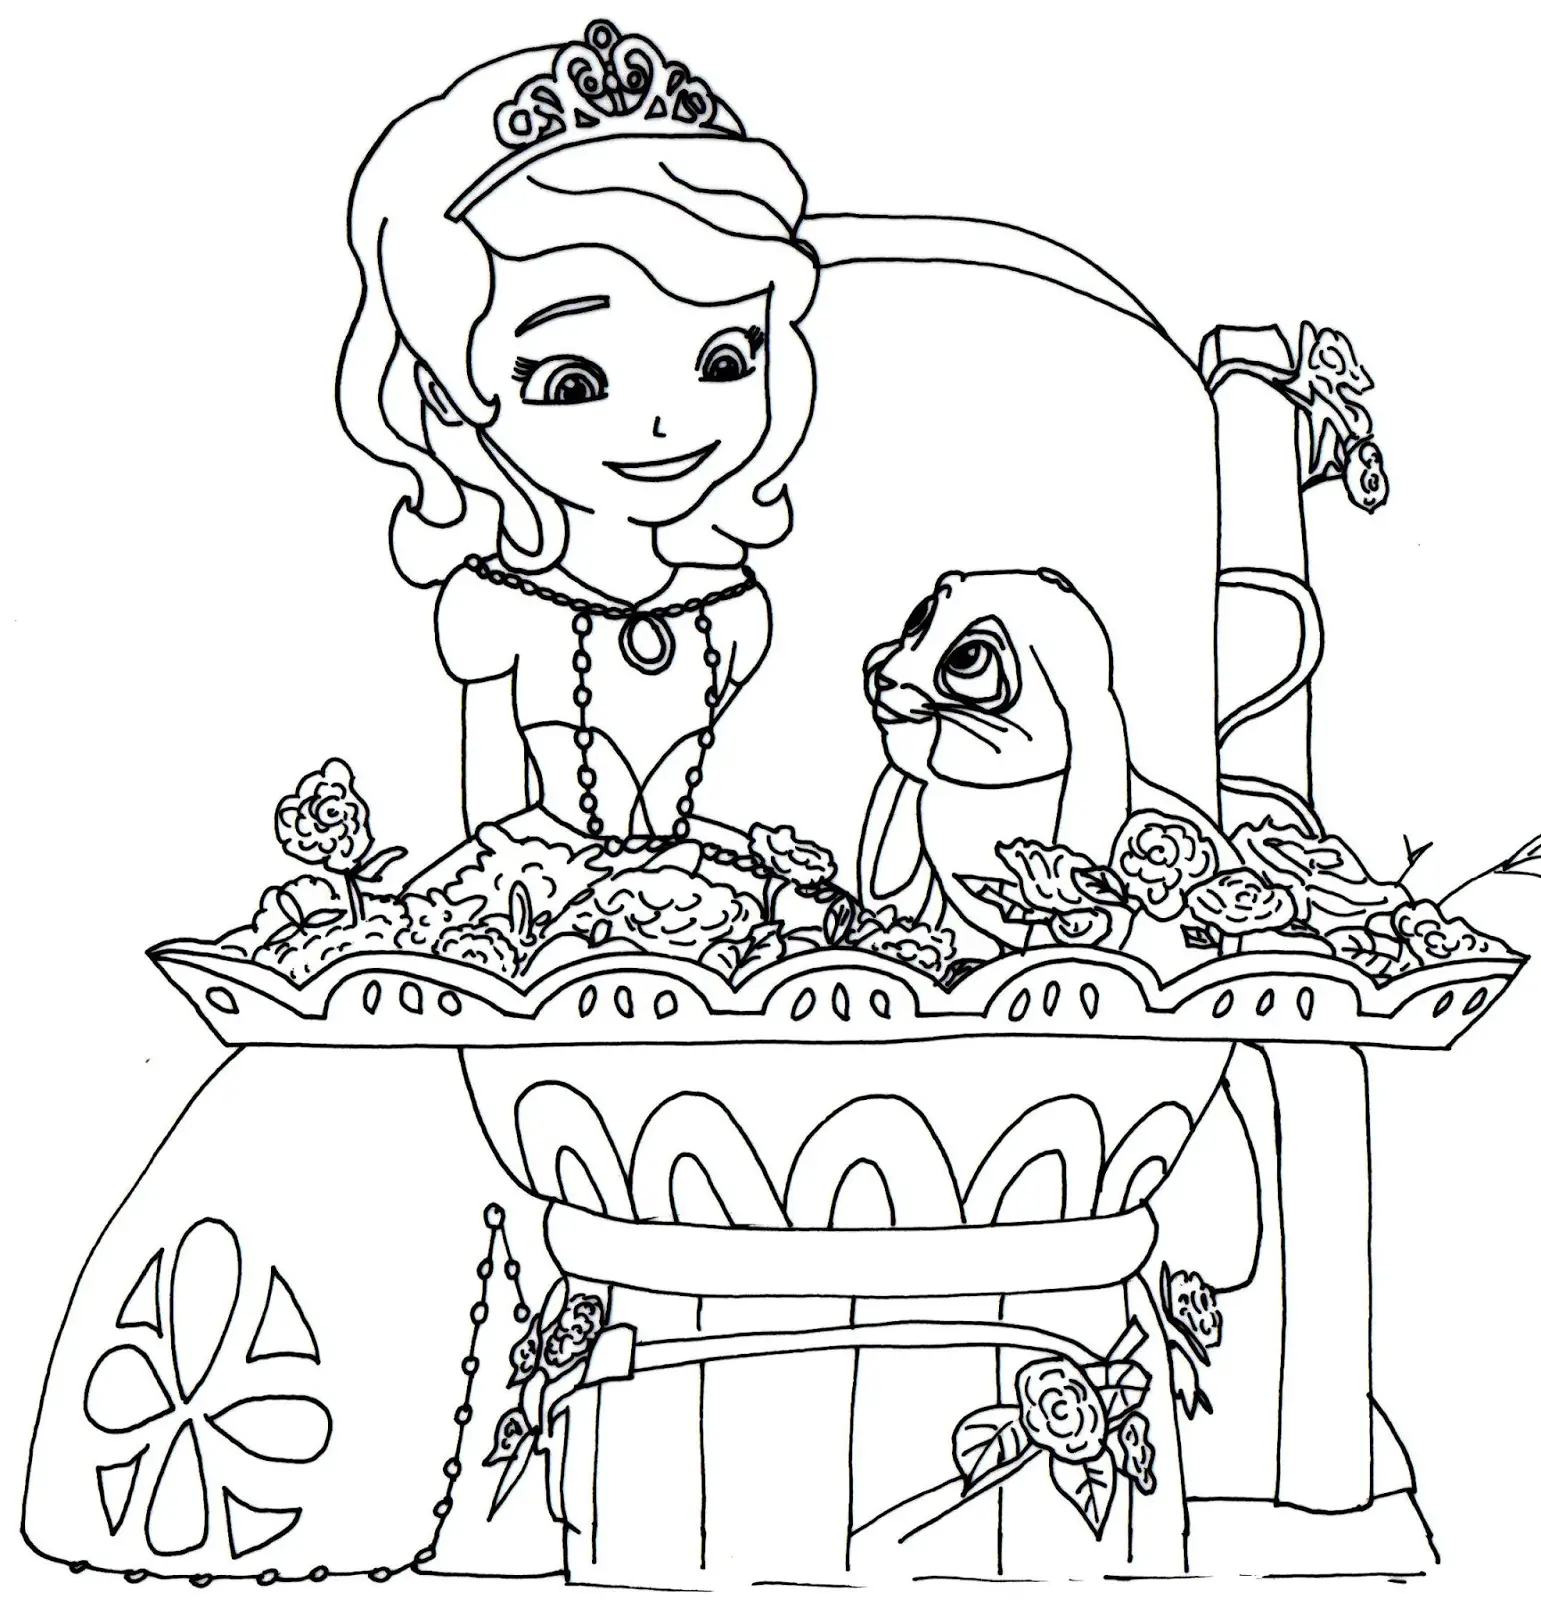 clover and sofia the first coloring page blue ribbon bunny